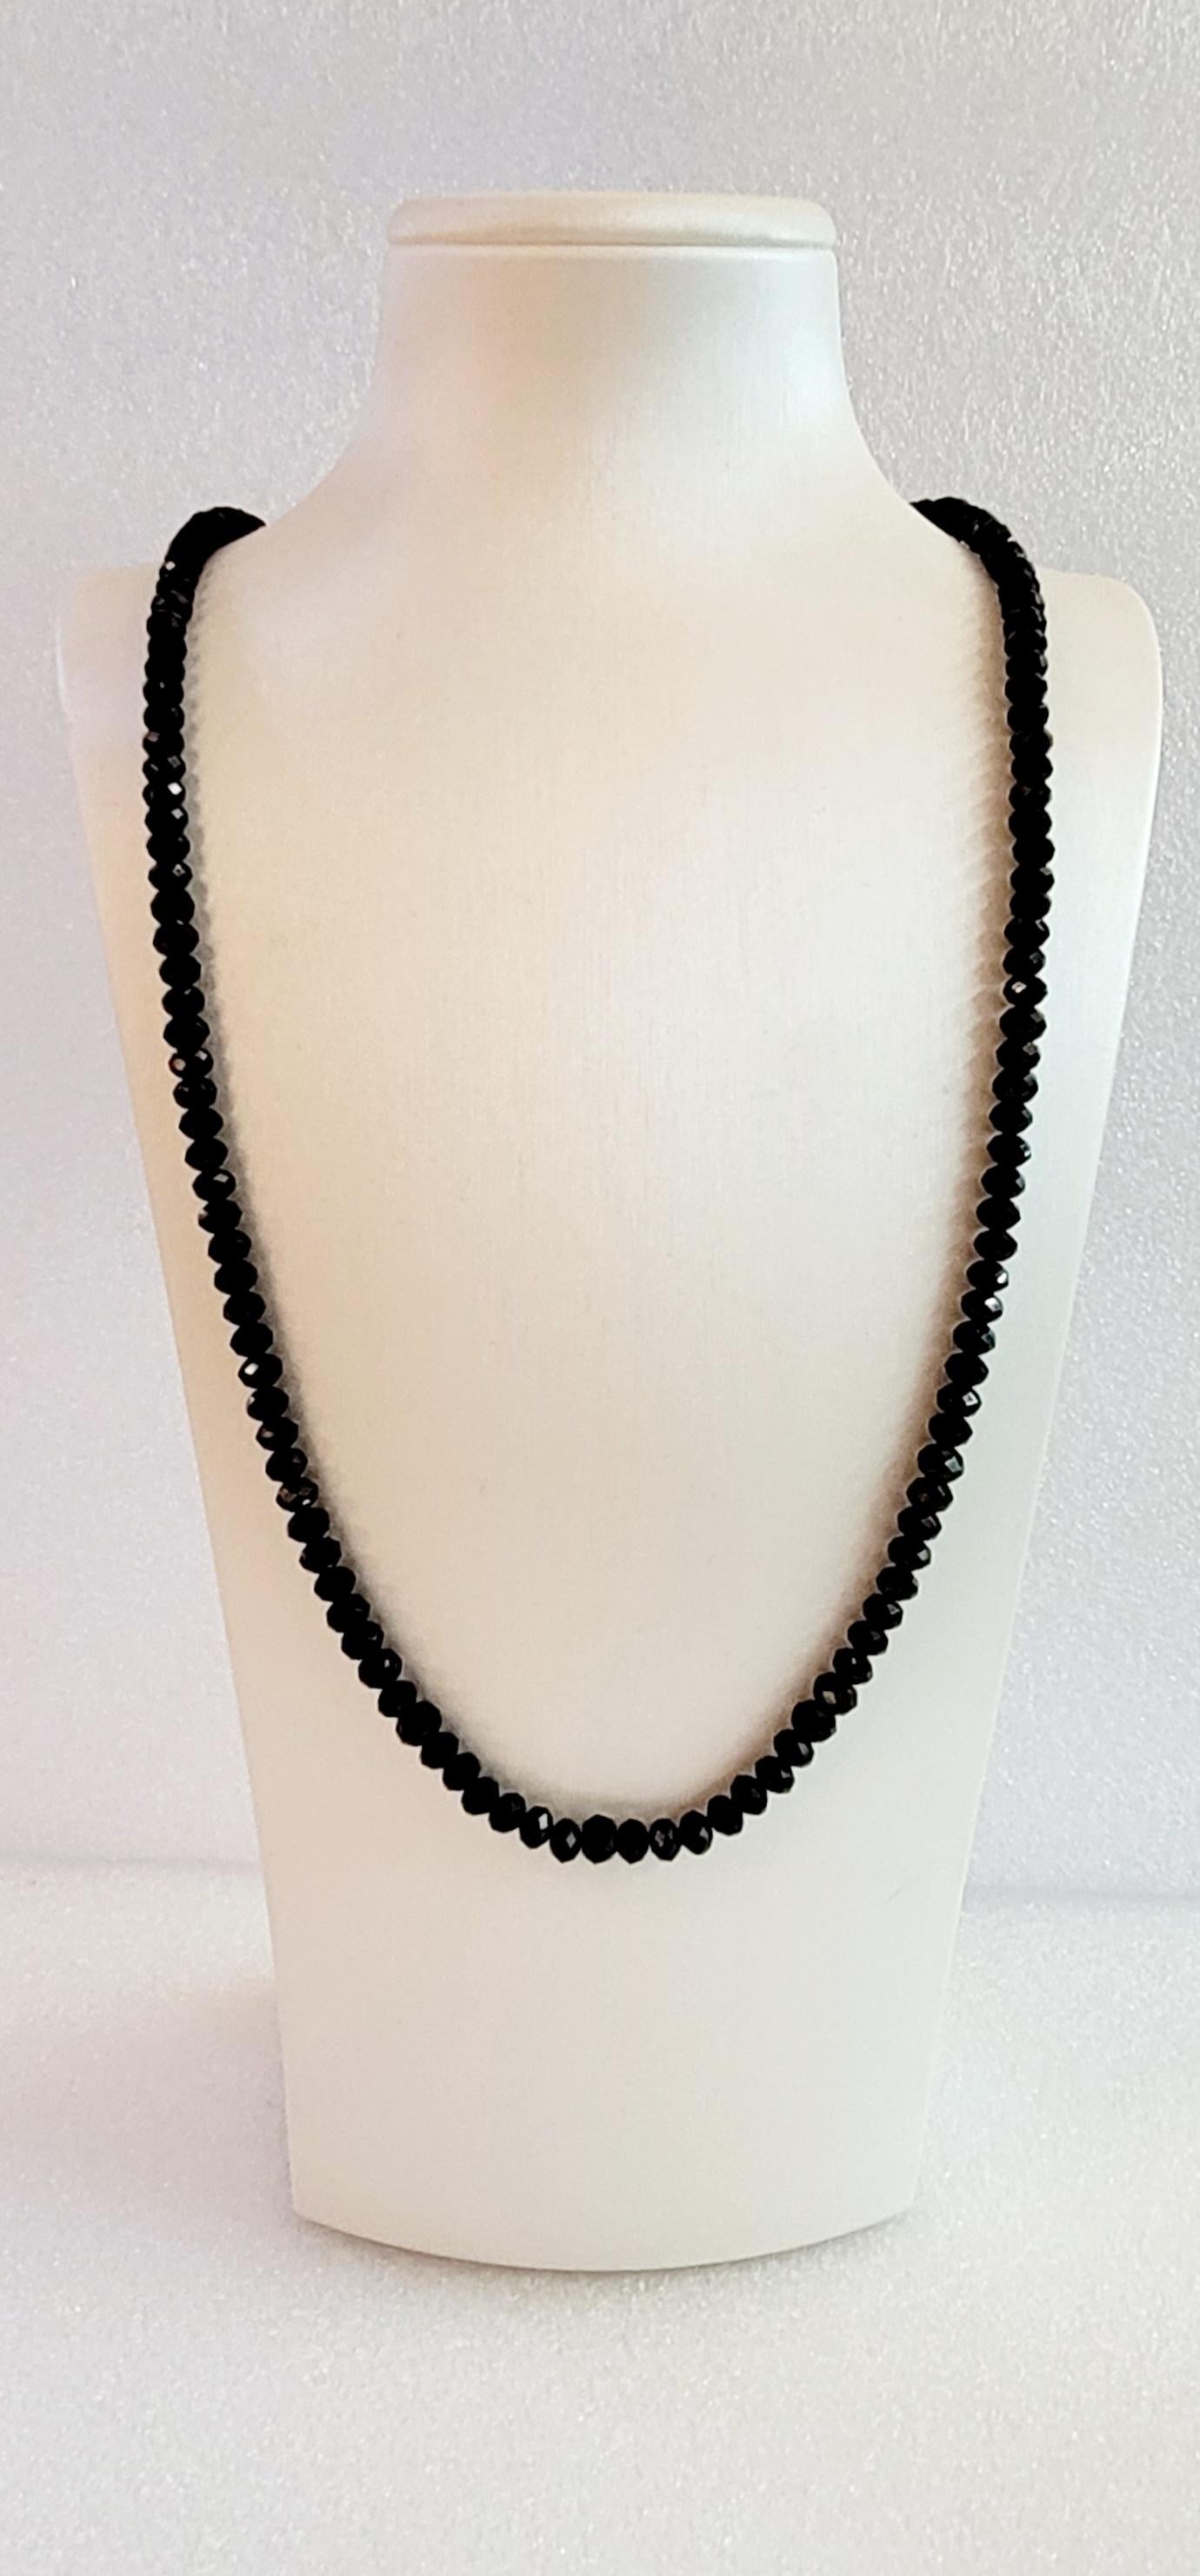 Round Cut Spiritual Beads Necklace Sterling Silver with Black Spinel, 5mm For Sale